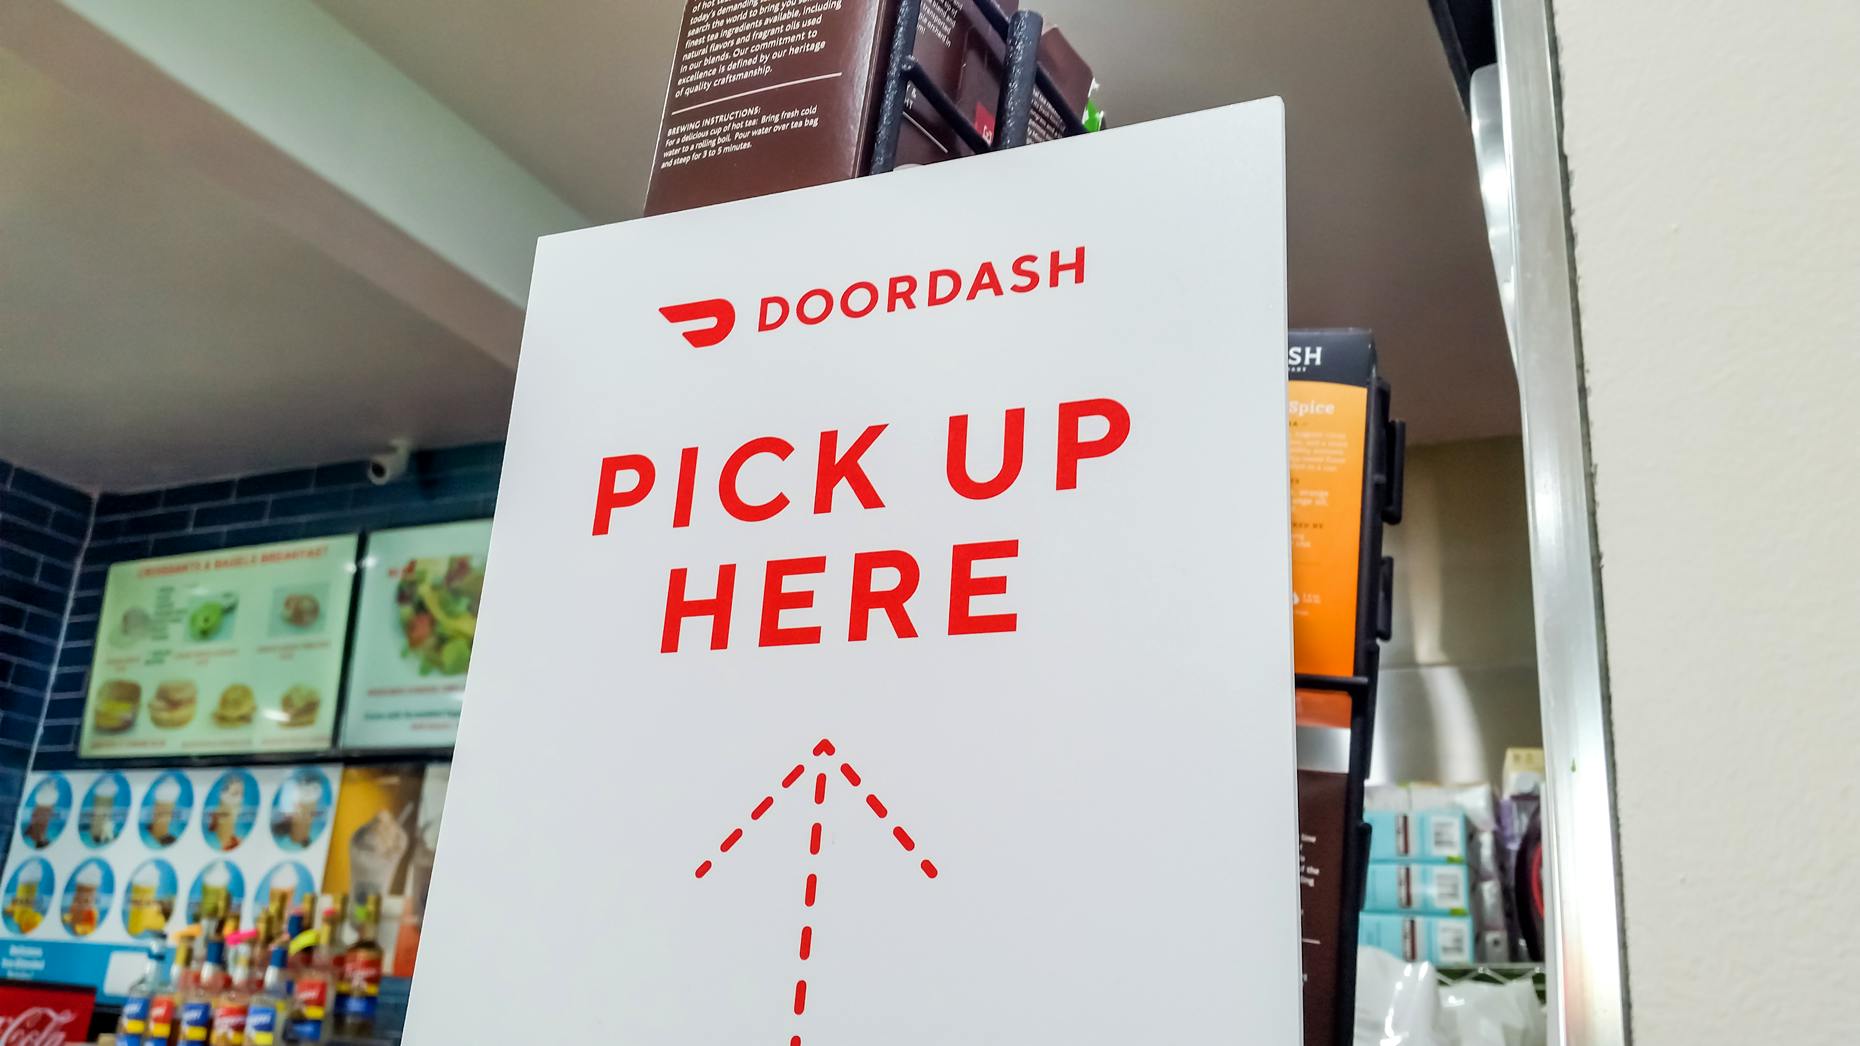 DoorDash projects strong demand for food, grocery orders; shares jump